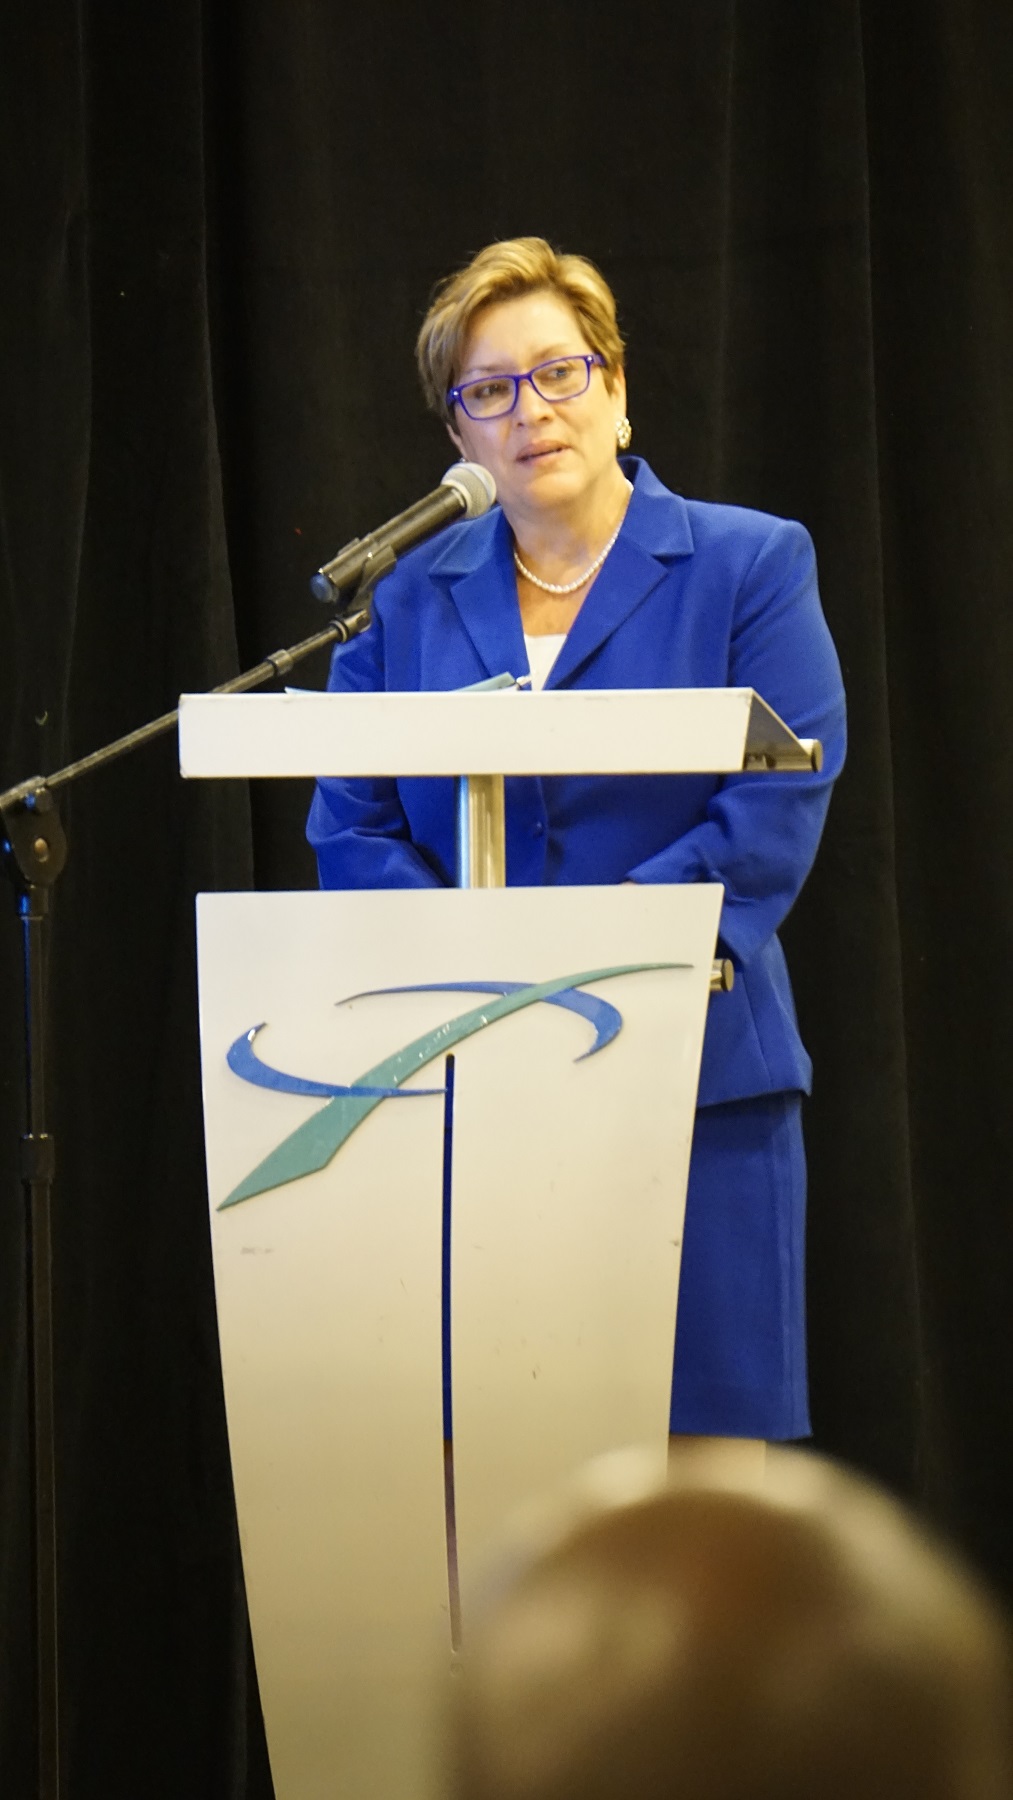 Leticia Monteagudo during CAP Conference: “Every airport can be a ... - Curacao Chronicle